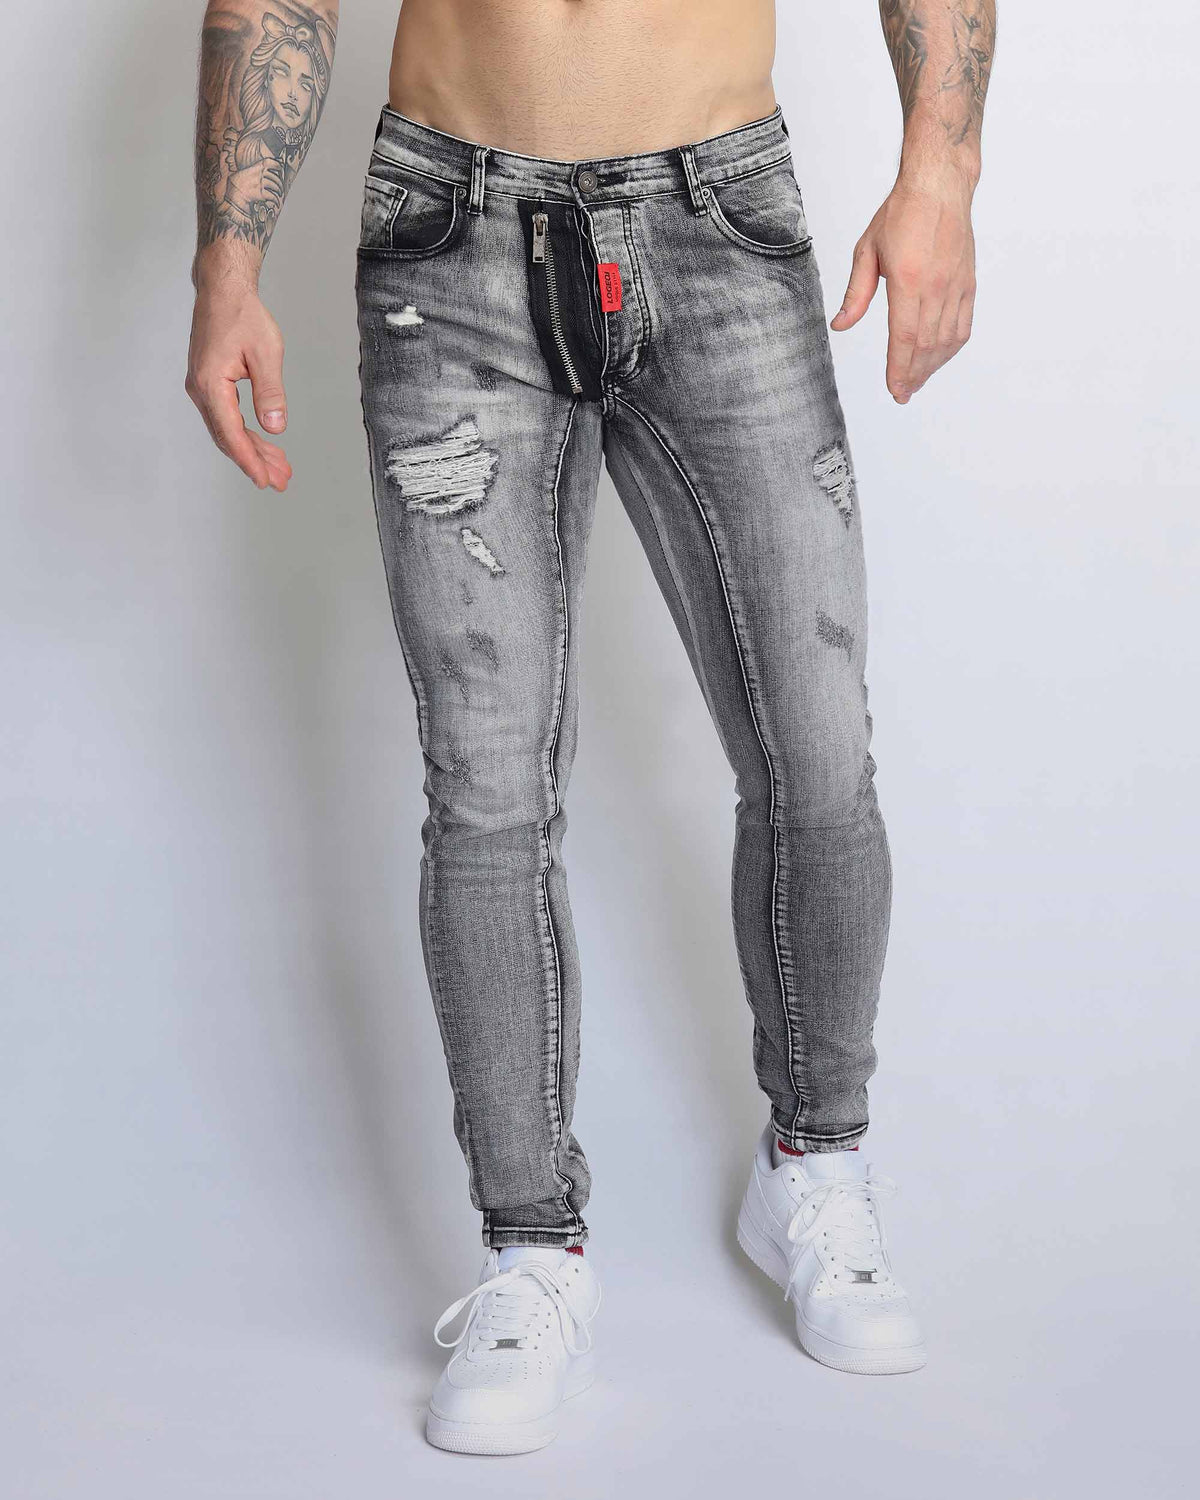 Black Ripped Jeans with Special Zipper Design